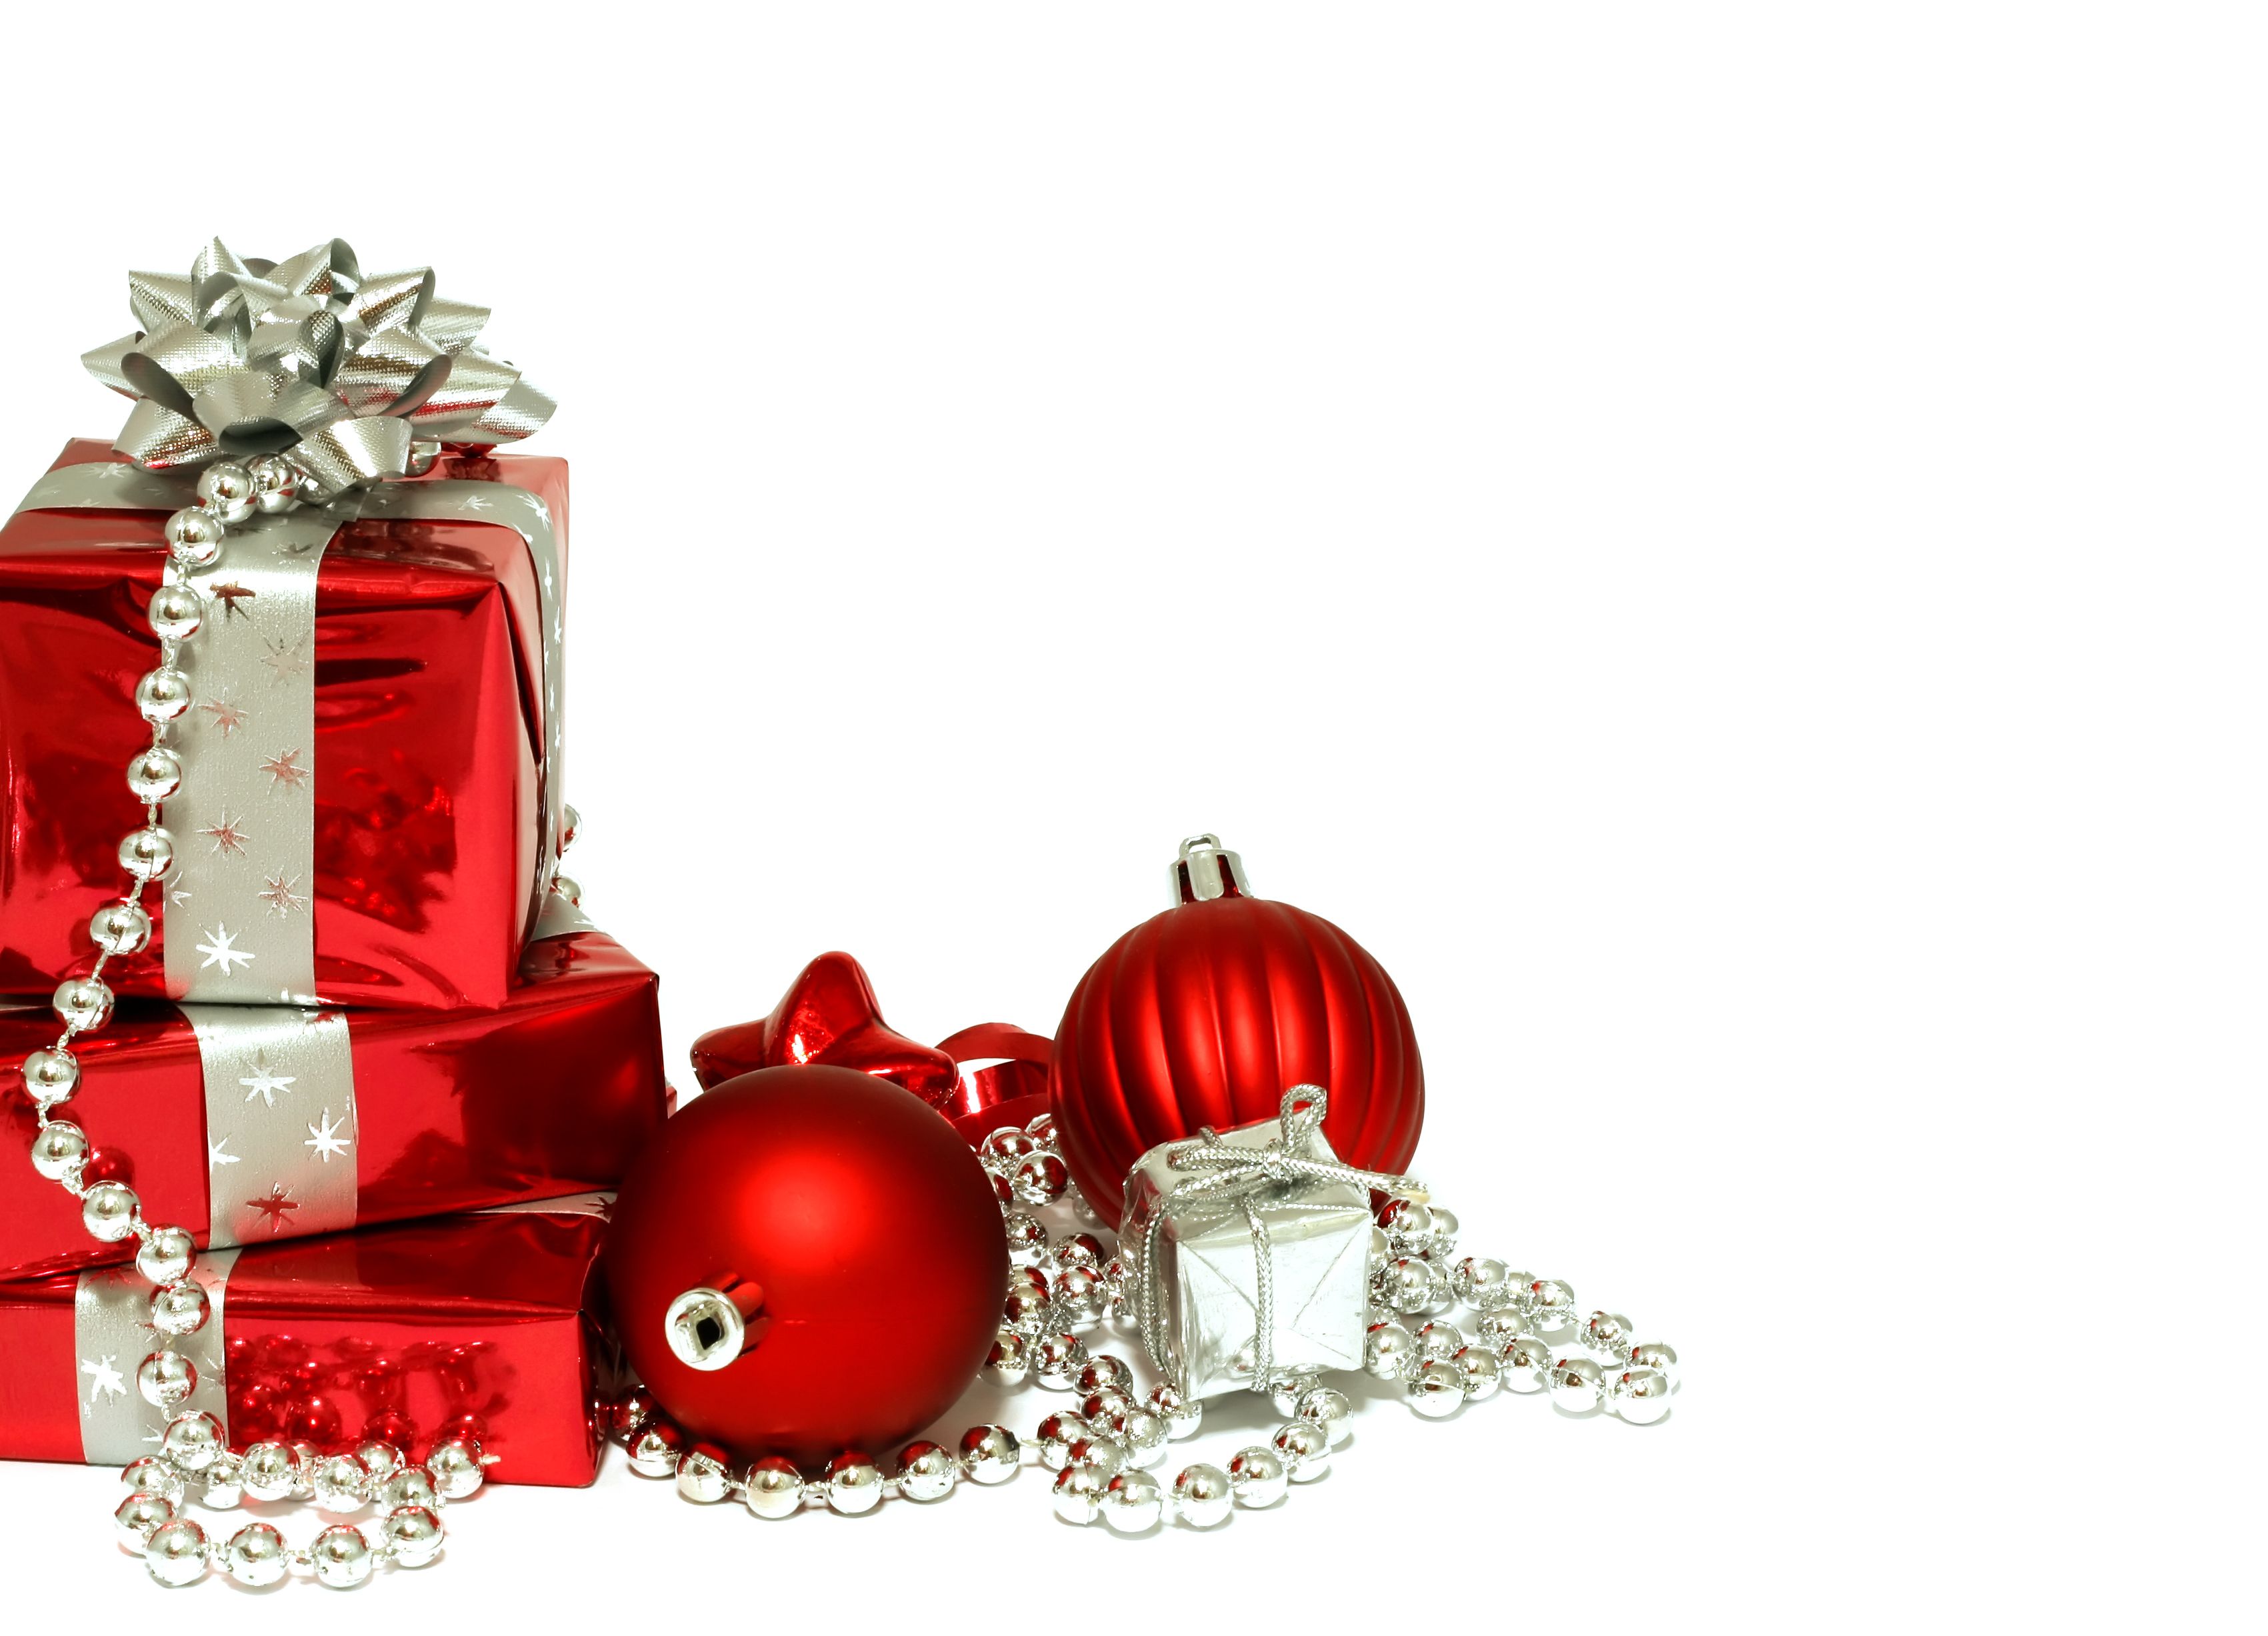 Free download Christmas wallpaper Red Christmas decorations and gifts on Christmas [3402x2454] for your Desktop, Mobile & Tablet. Explore Christmas Present Wallpaperd Christmas Wallpaper, Christmas Wallpaper Background, Christmas